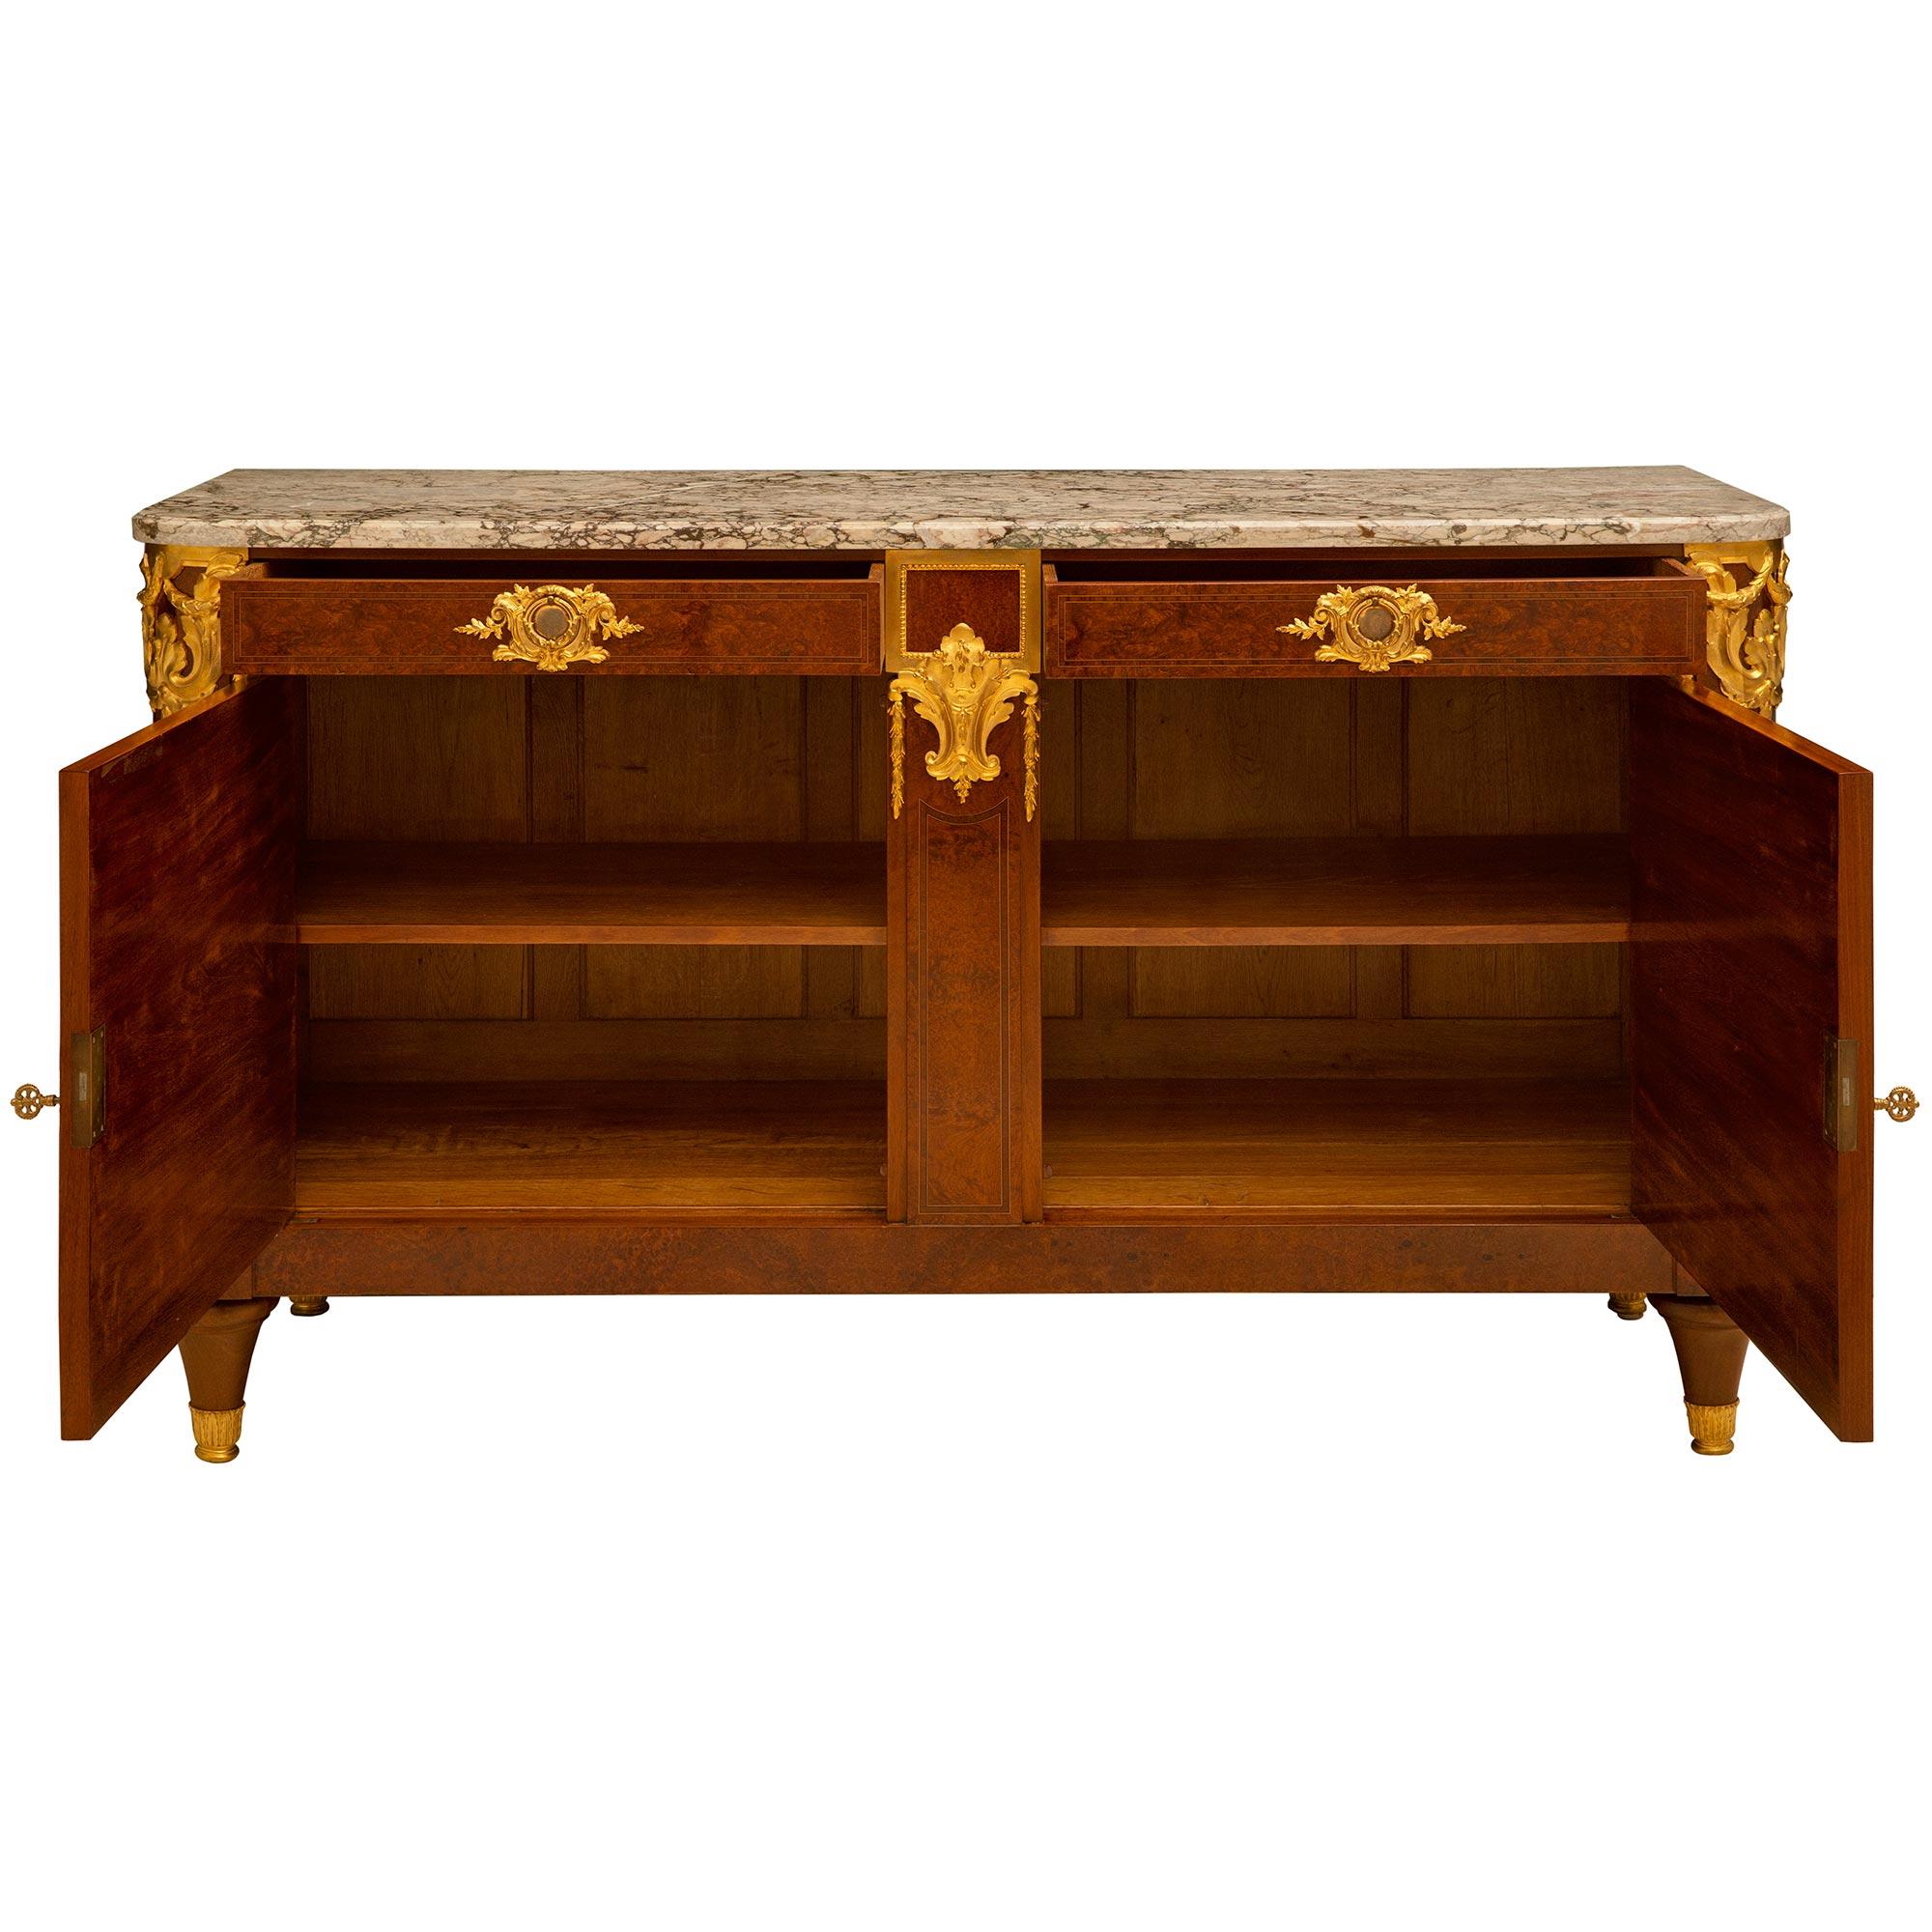 French 19th Century Empire Neoclassical Style Burl Walnut and Ormolu Buffet In Good Condition For Sale In West Palm Beach, FL